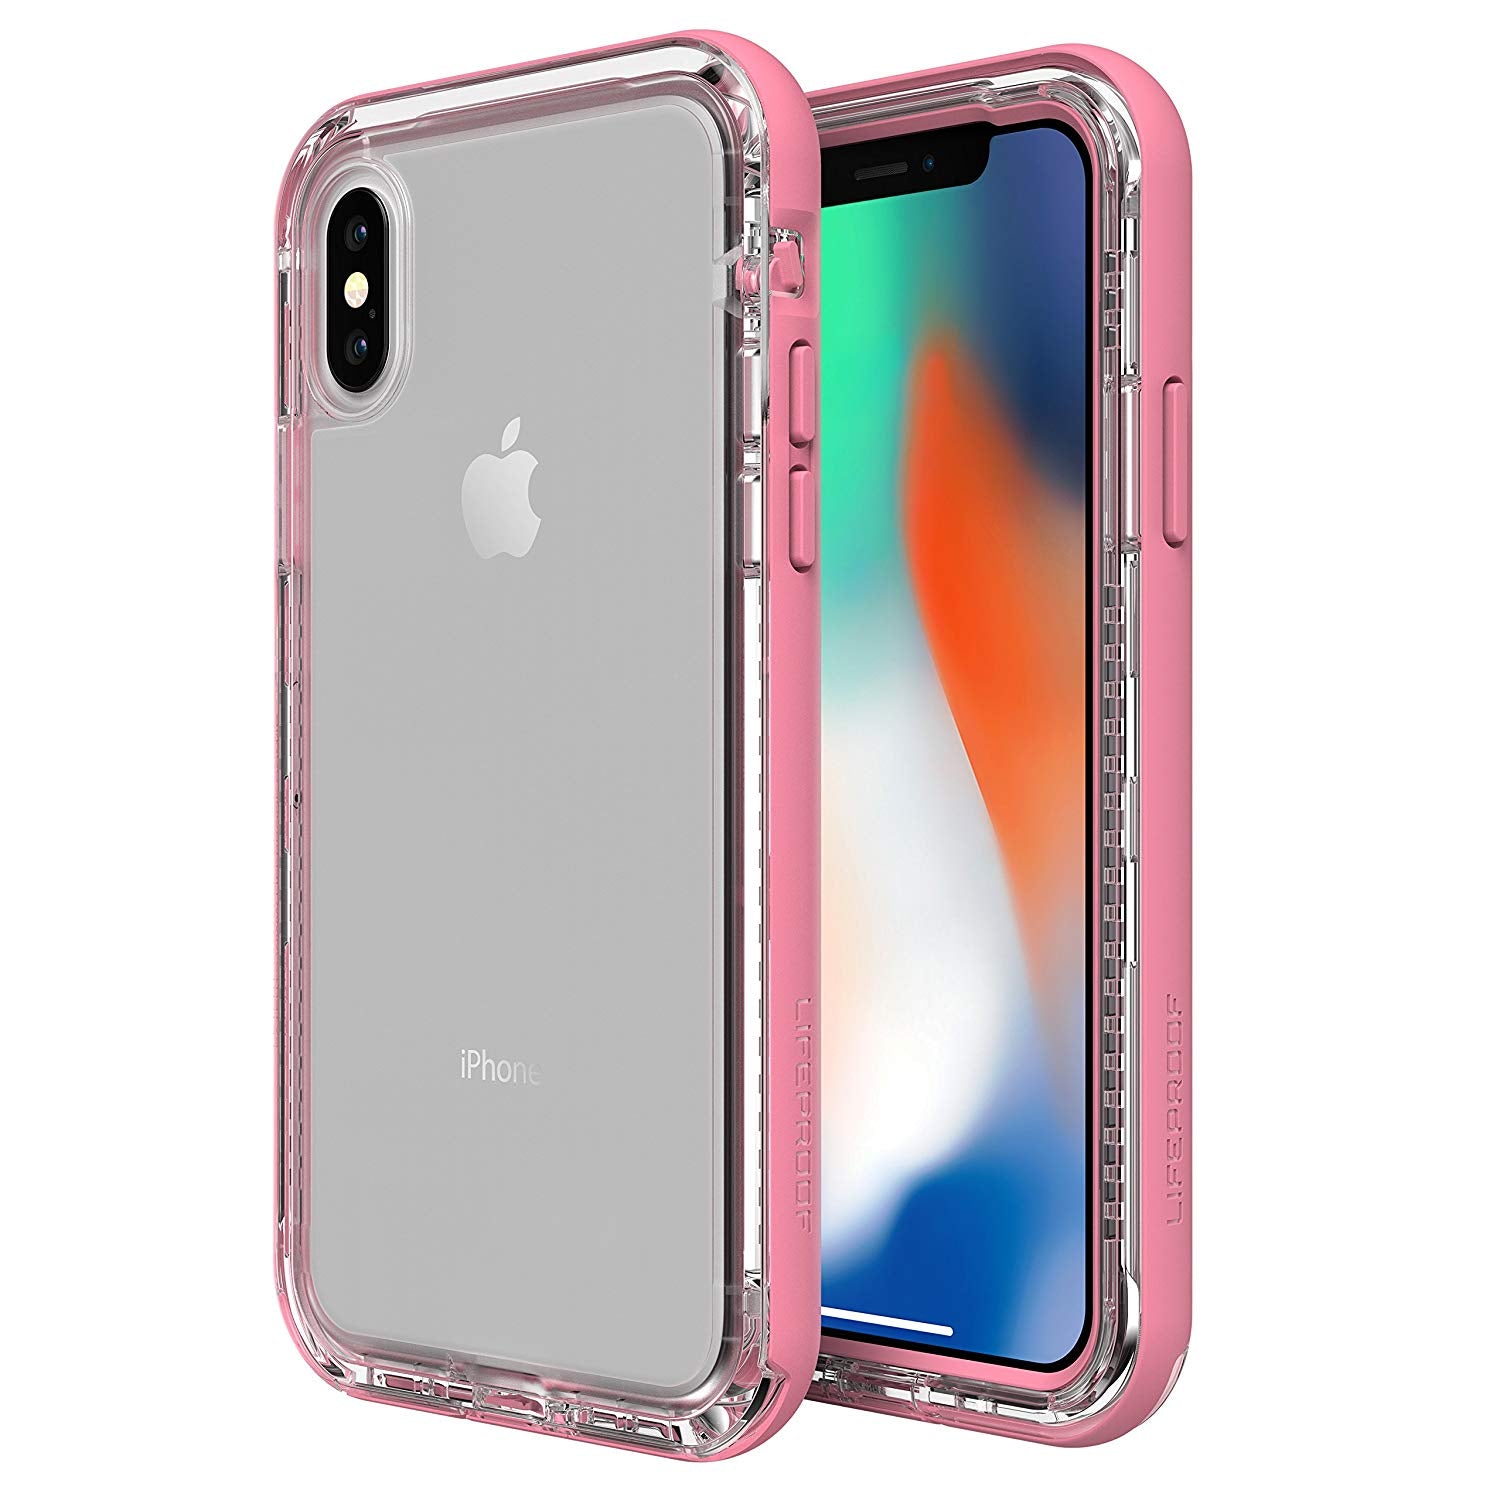 LifeProof NEXT SERIES Case for iPhone X / iPhone XS - Cactus Rose (Certified Refurbished)